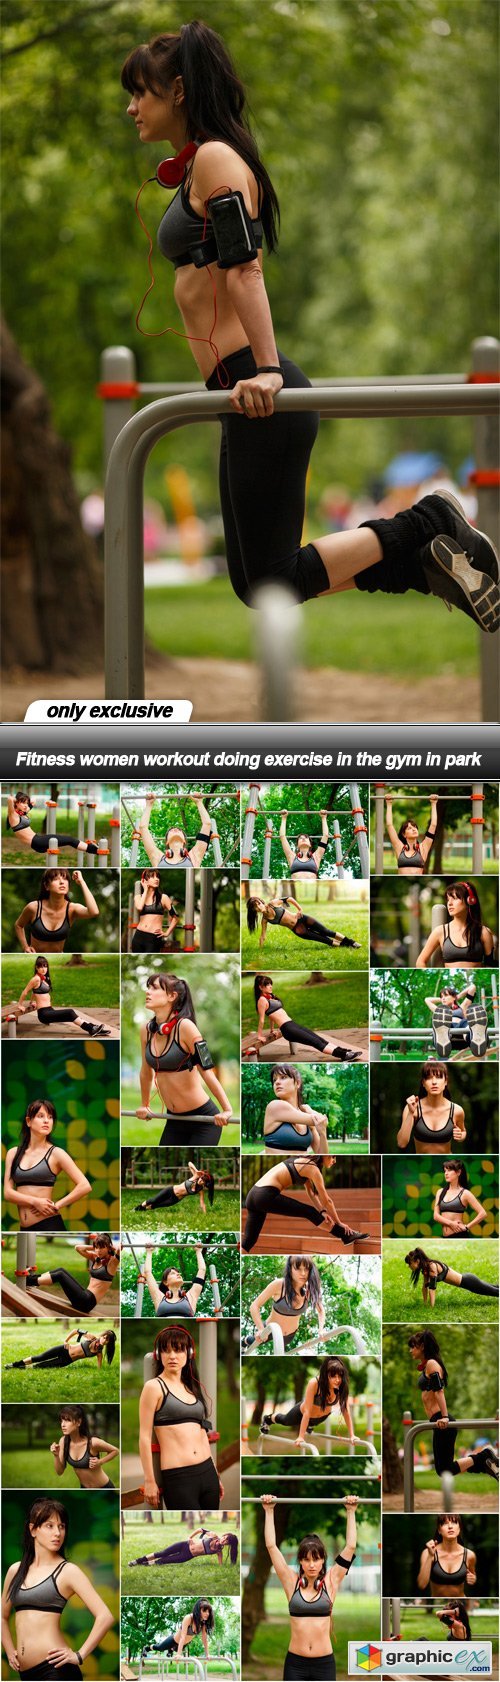 Fitness women workout doing exercise in the gym in park - 33 UHQ JPEG